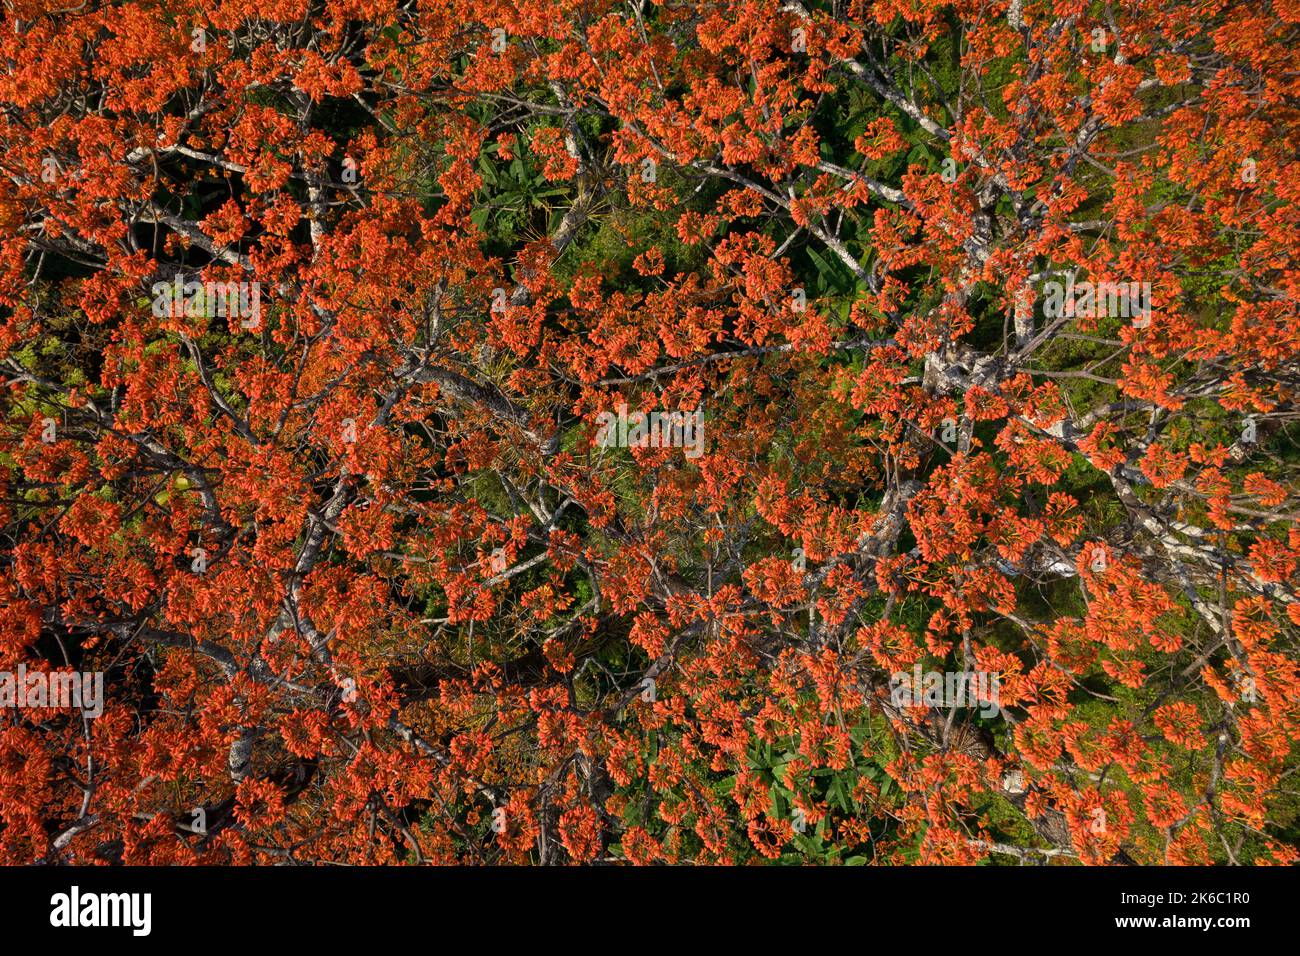 Aerial top view of a Pterocymbium macranthum tree in full blossom, Chiang dao rainforest, Thailand Stock Photo